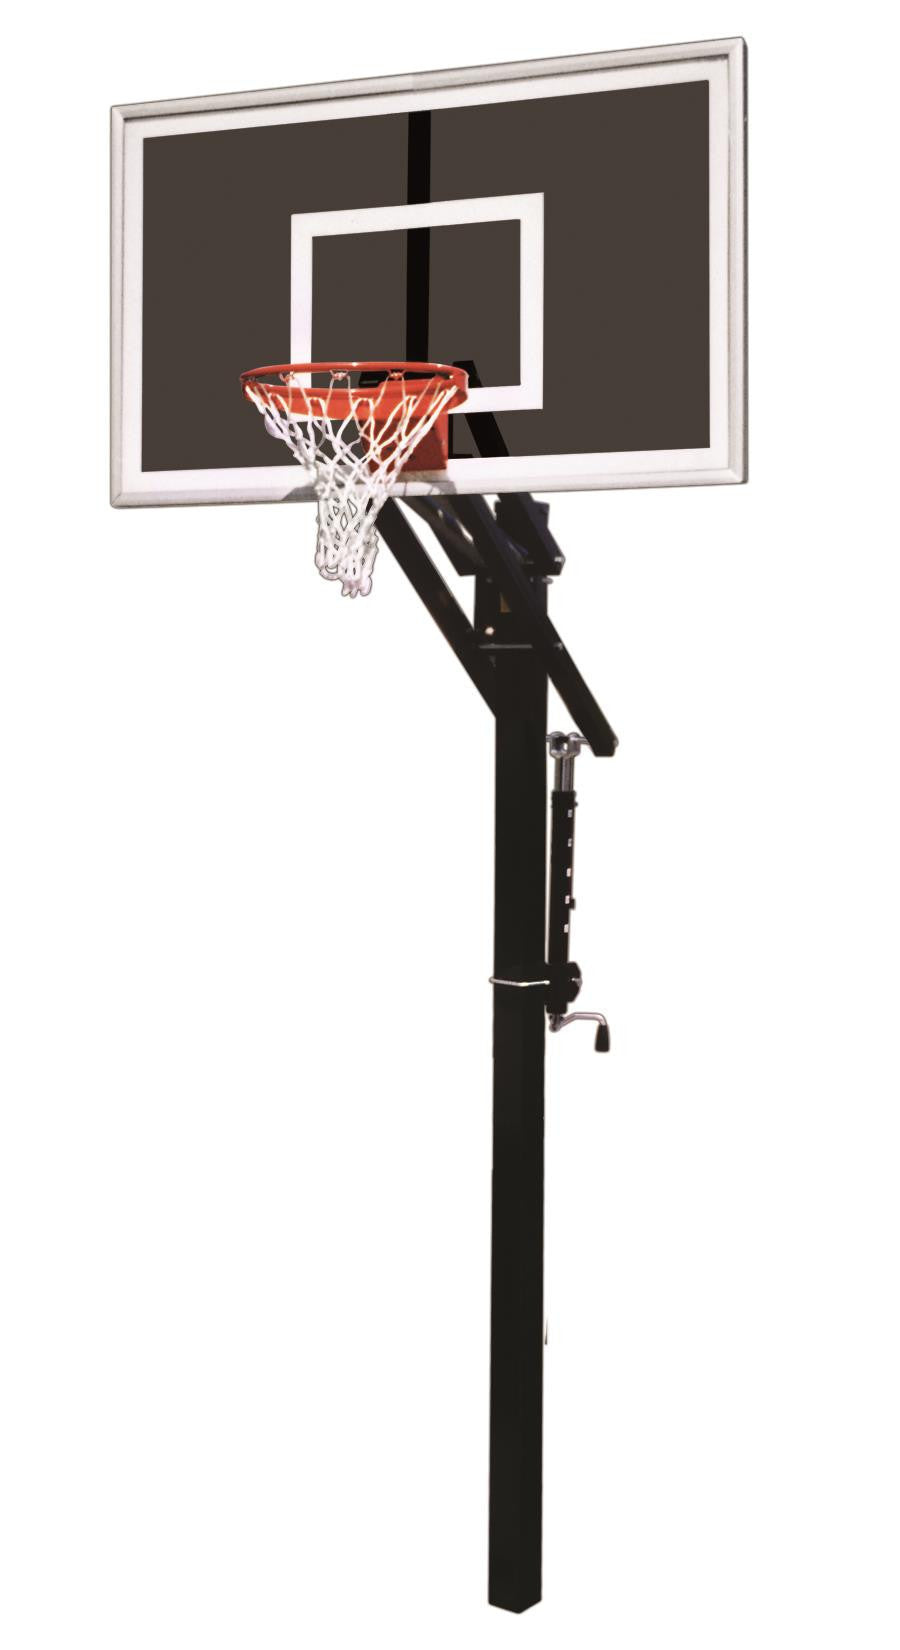 First Team Jam Eclipse In Ground Outdoor Adjustable Basketball Hoop 60 inch Smoked Tempered Glass